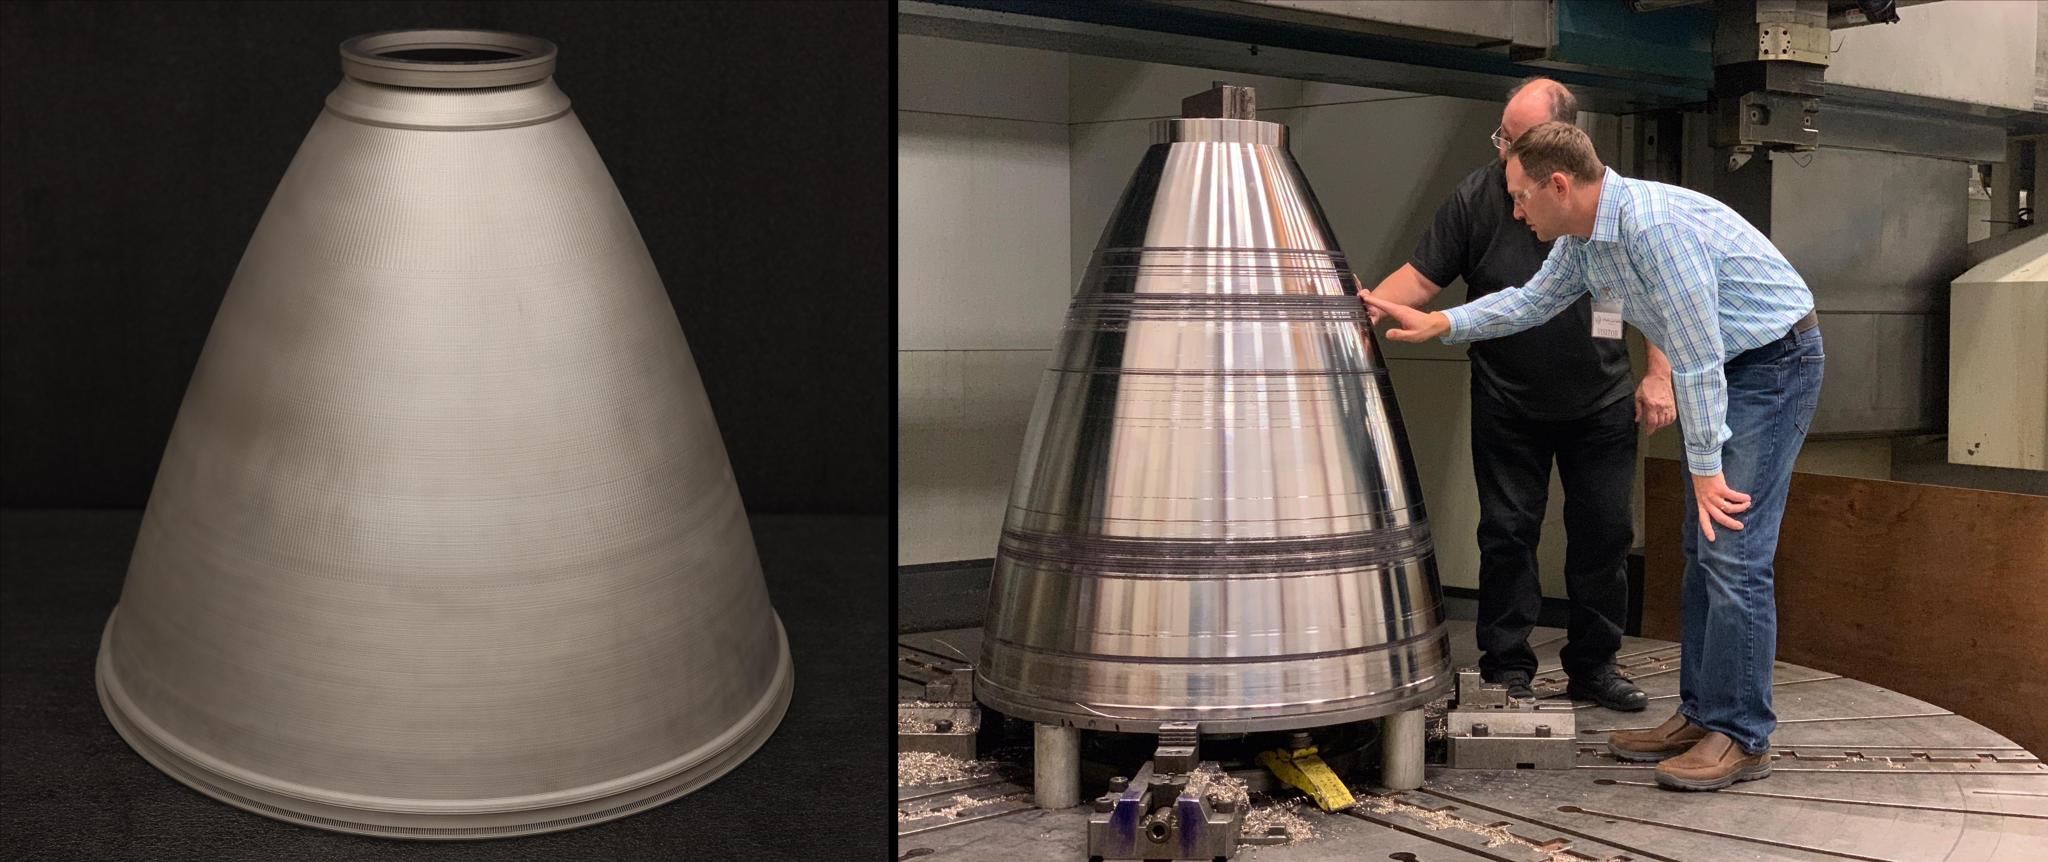 3D printed rocket engine nozzles and two men looking at them